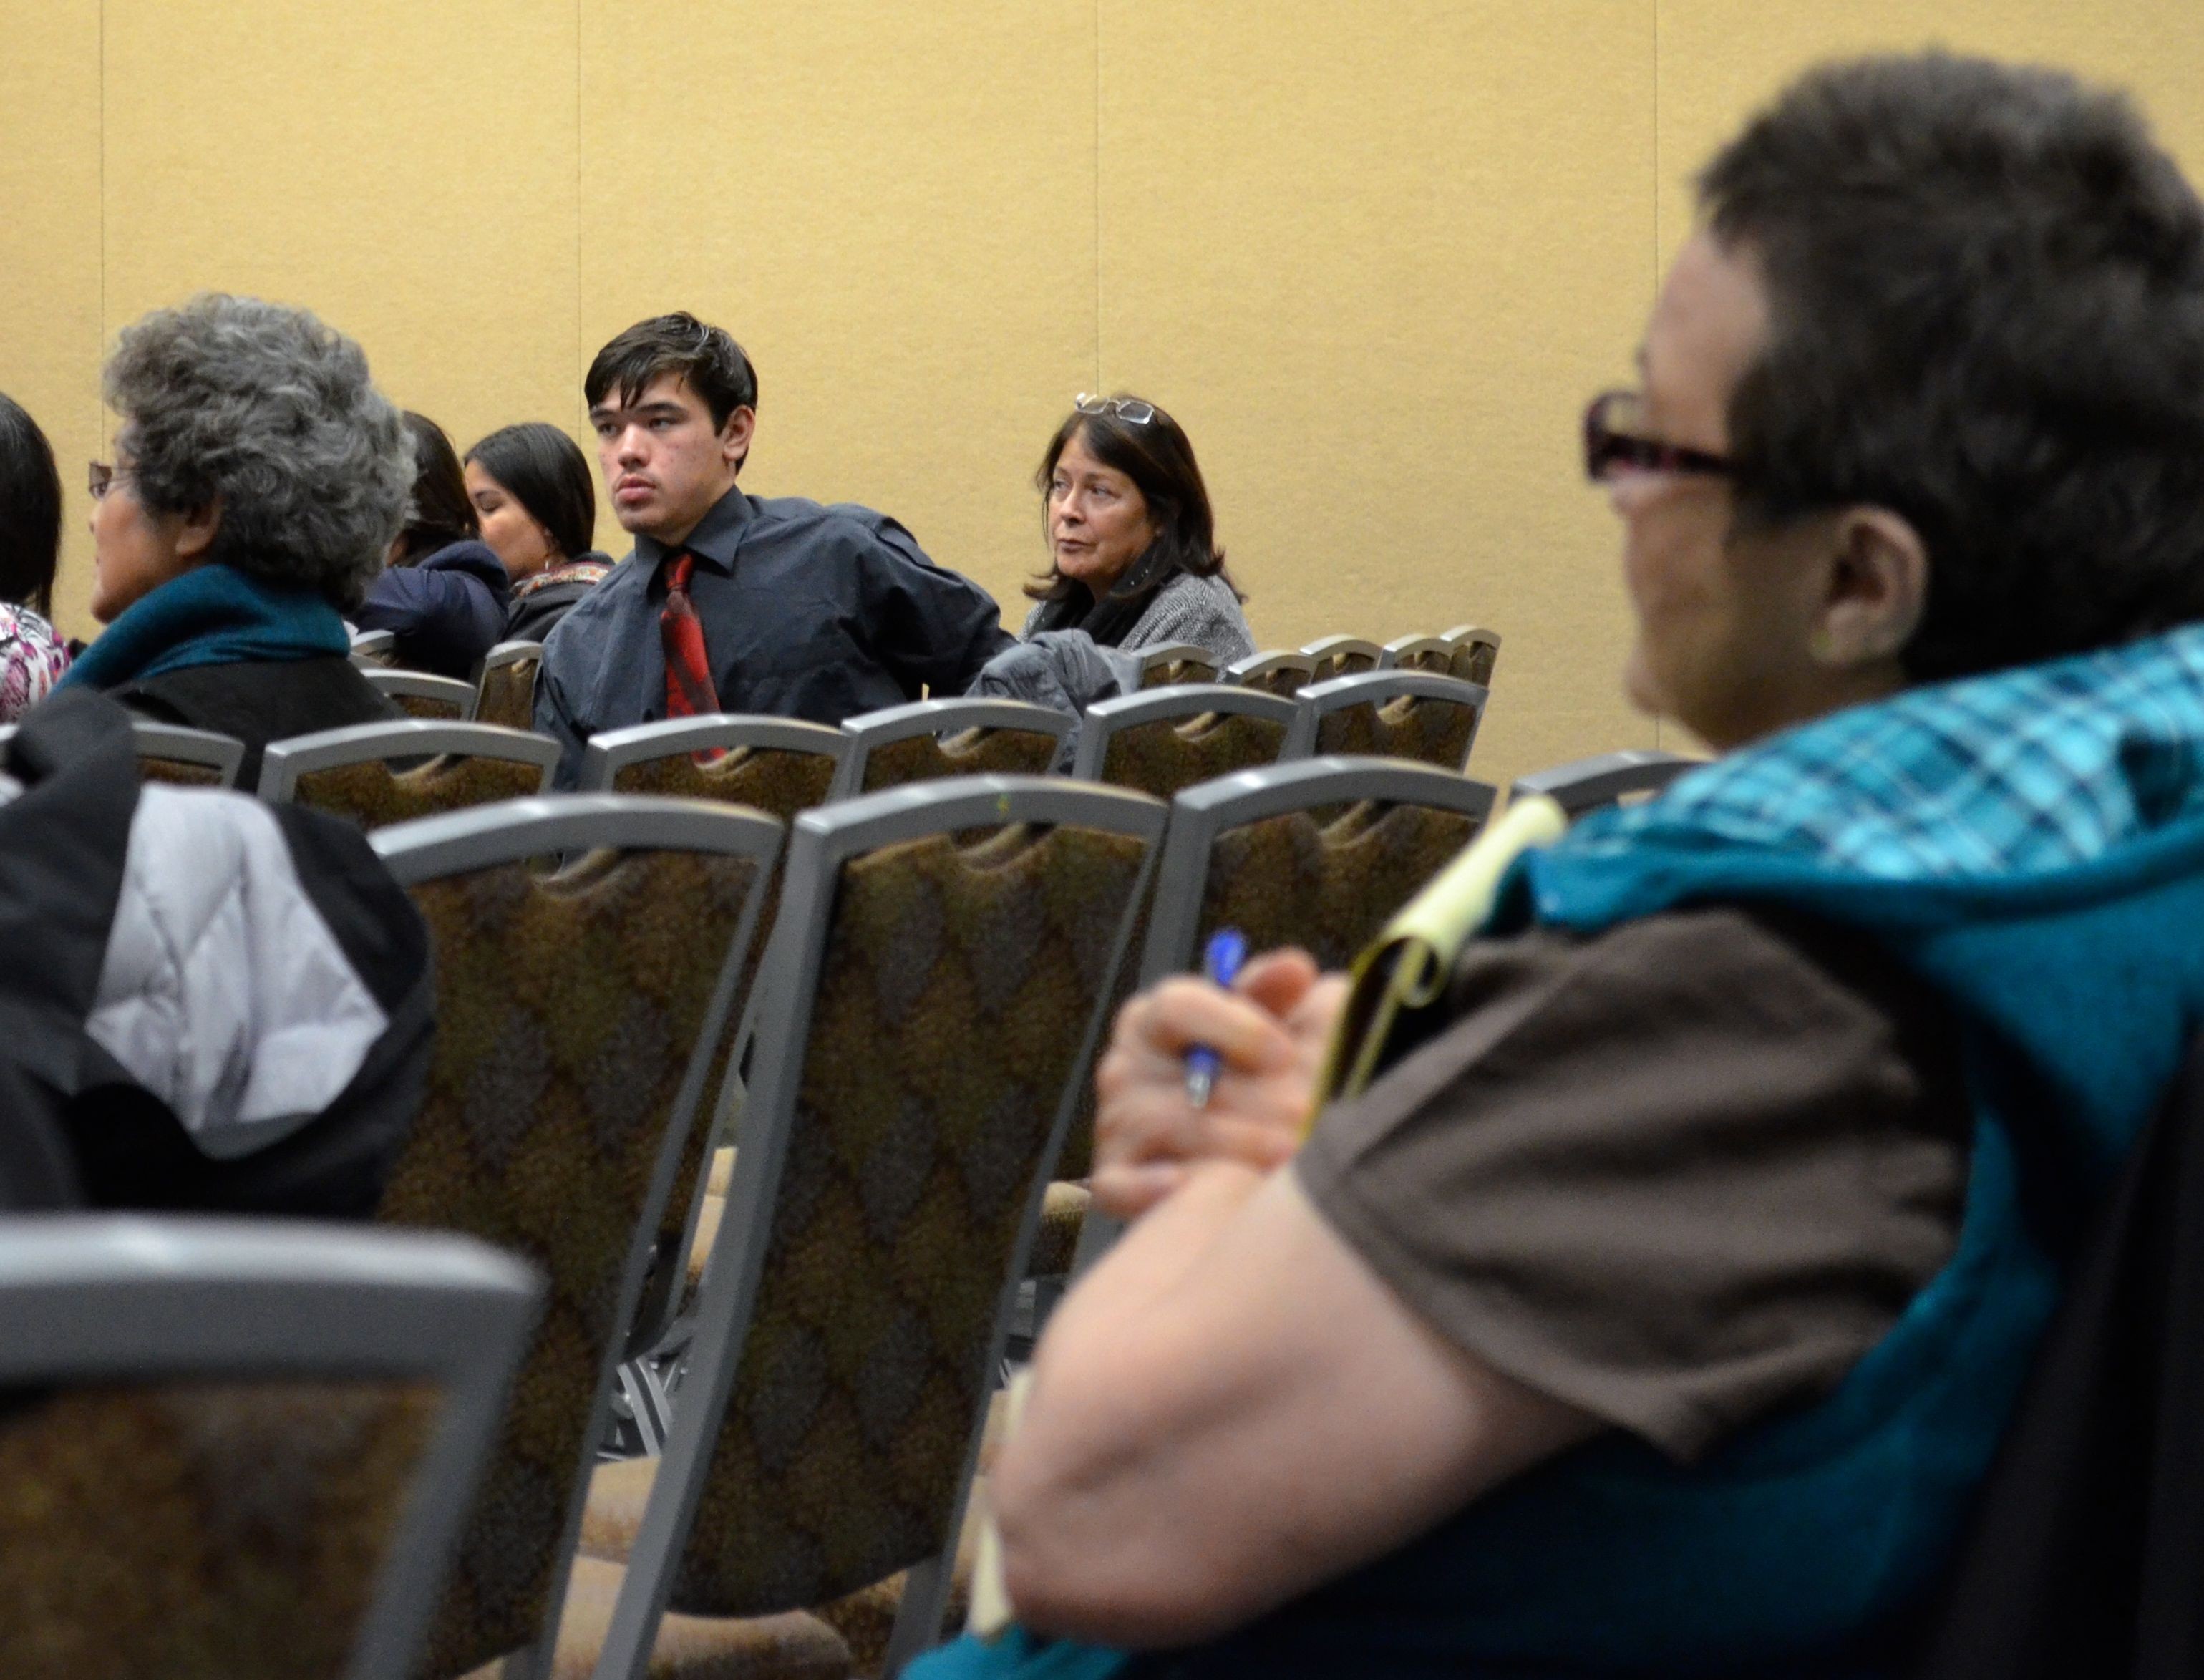 Alaska Federation of Natives President Julie Kitka listens during a panel discussion on taking tribal land into trust. (Photo by Jennifer Canfield/KTOO)